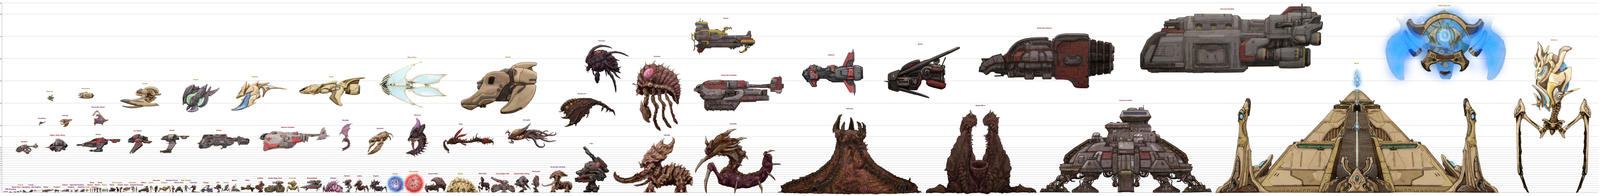 Starcraft to Scale (old)